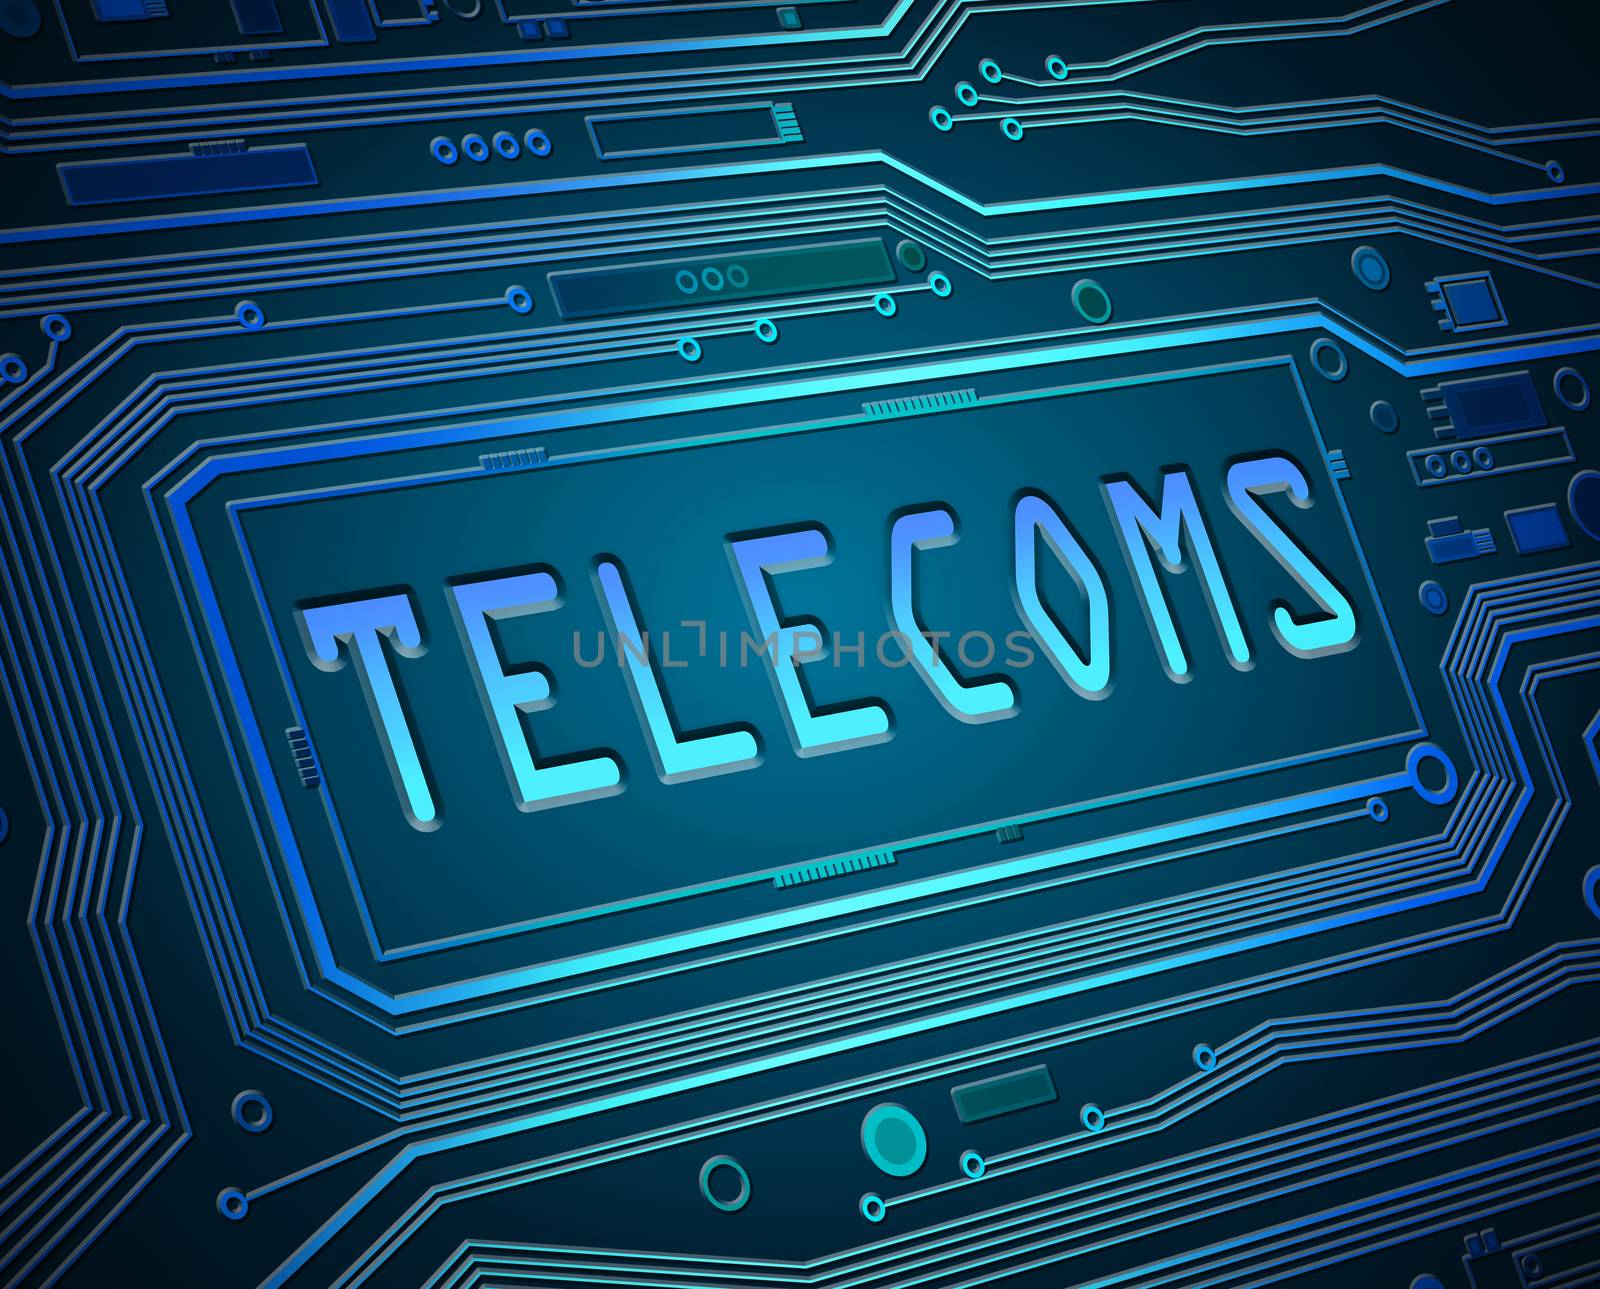 Abstract telecoms concept. by 72soul